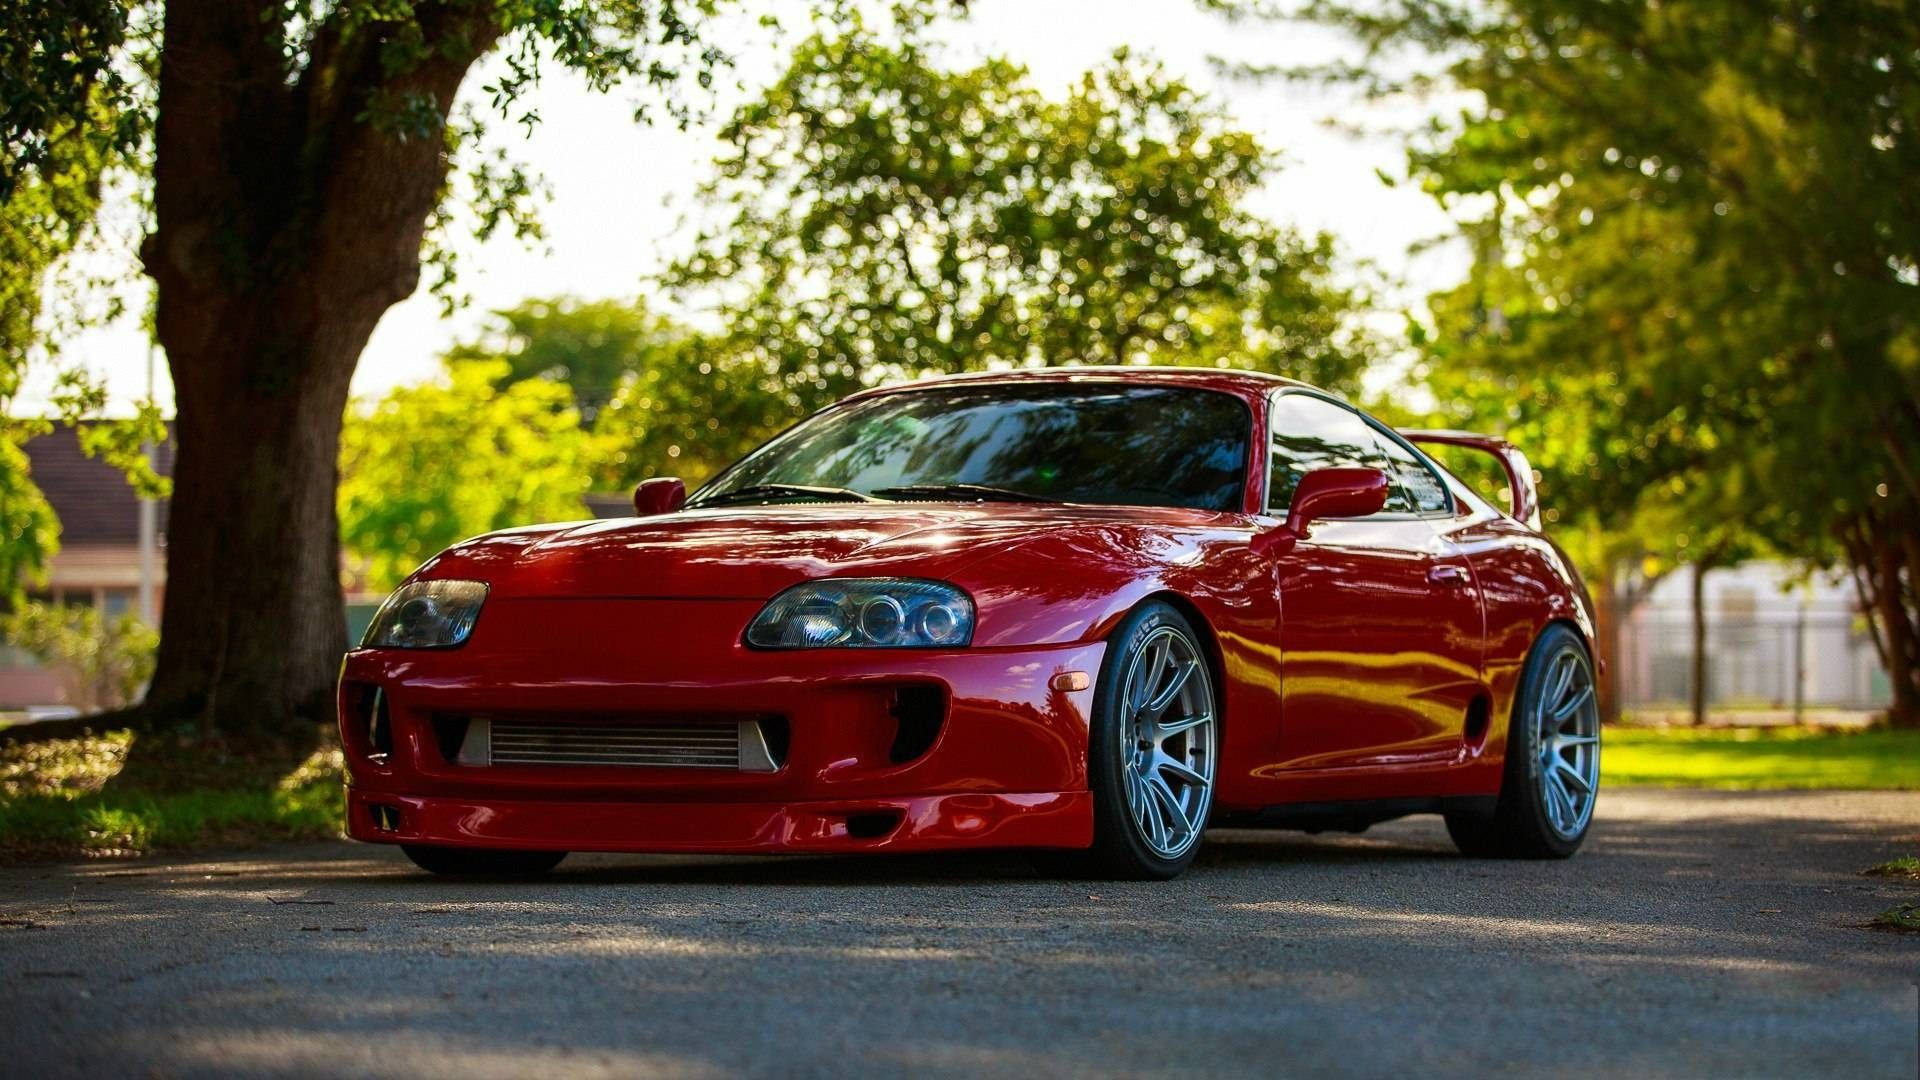 Lustrous Red Toyota Supra Car Background